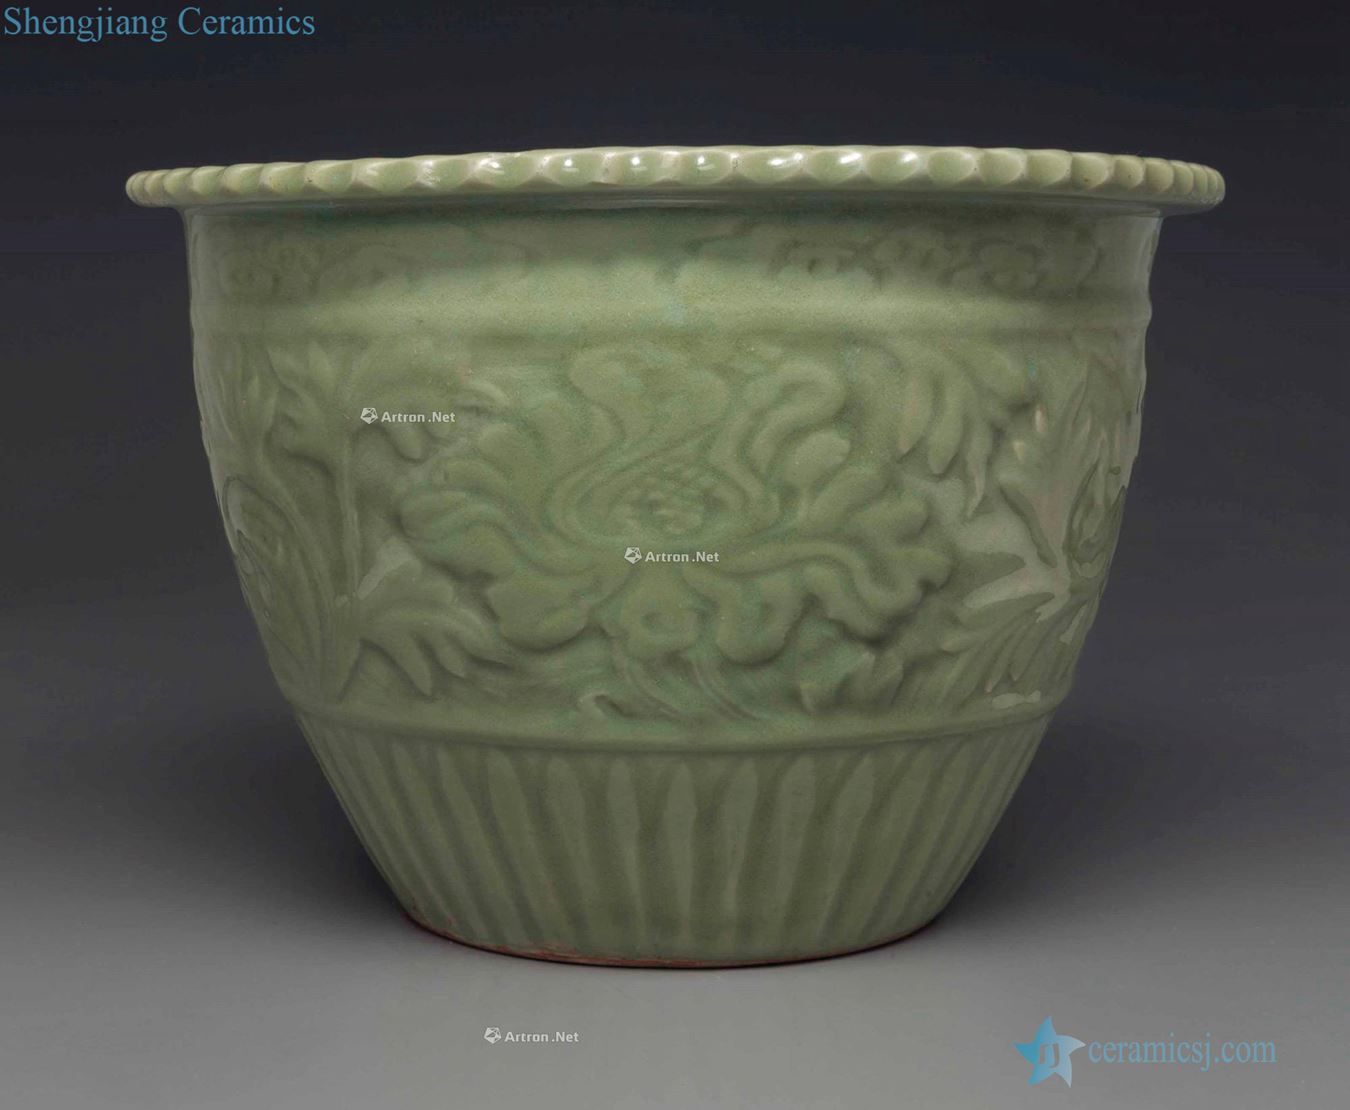 Ming, A 14th century RARE LONGQUAN CELADON CARVED JARDINIERE